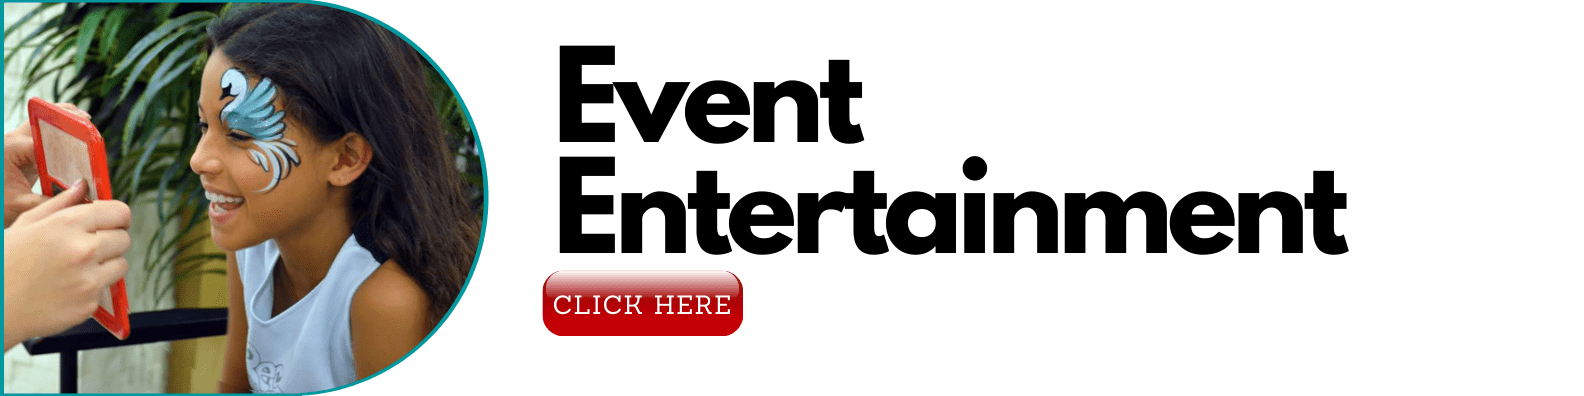 Event Entertainment Contact Information Page Button For Yte Events And Balloon Decor